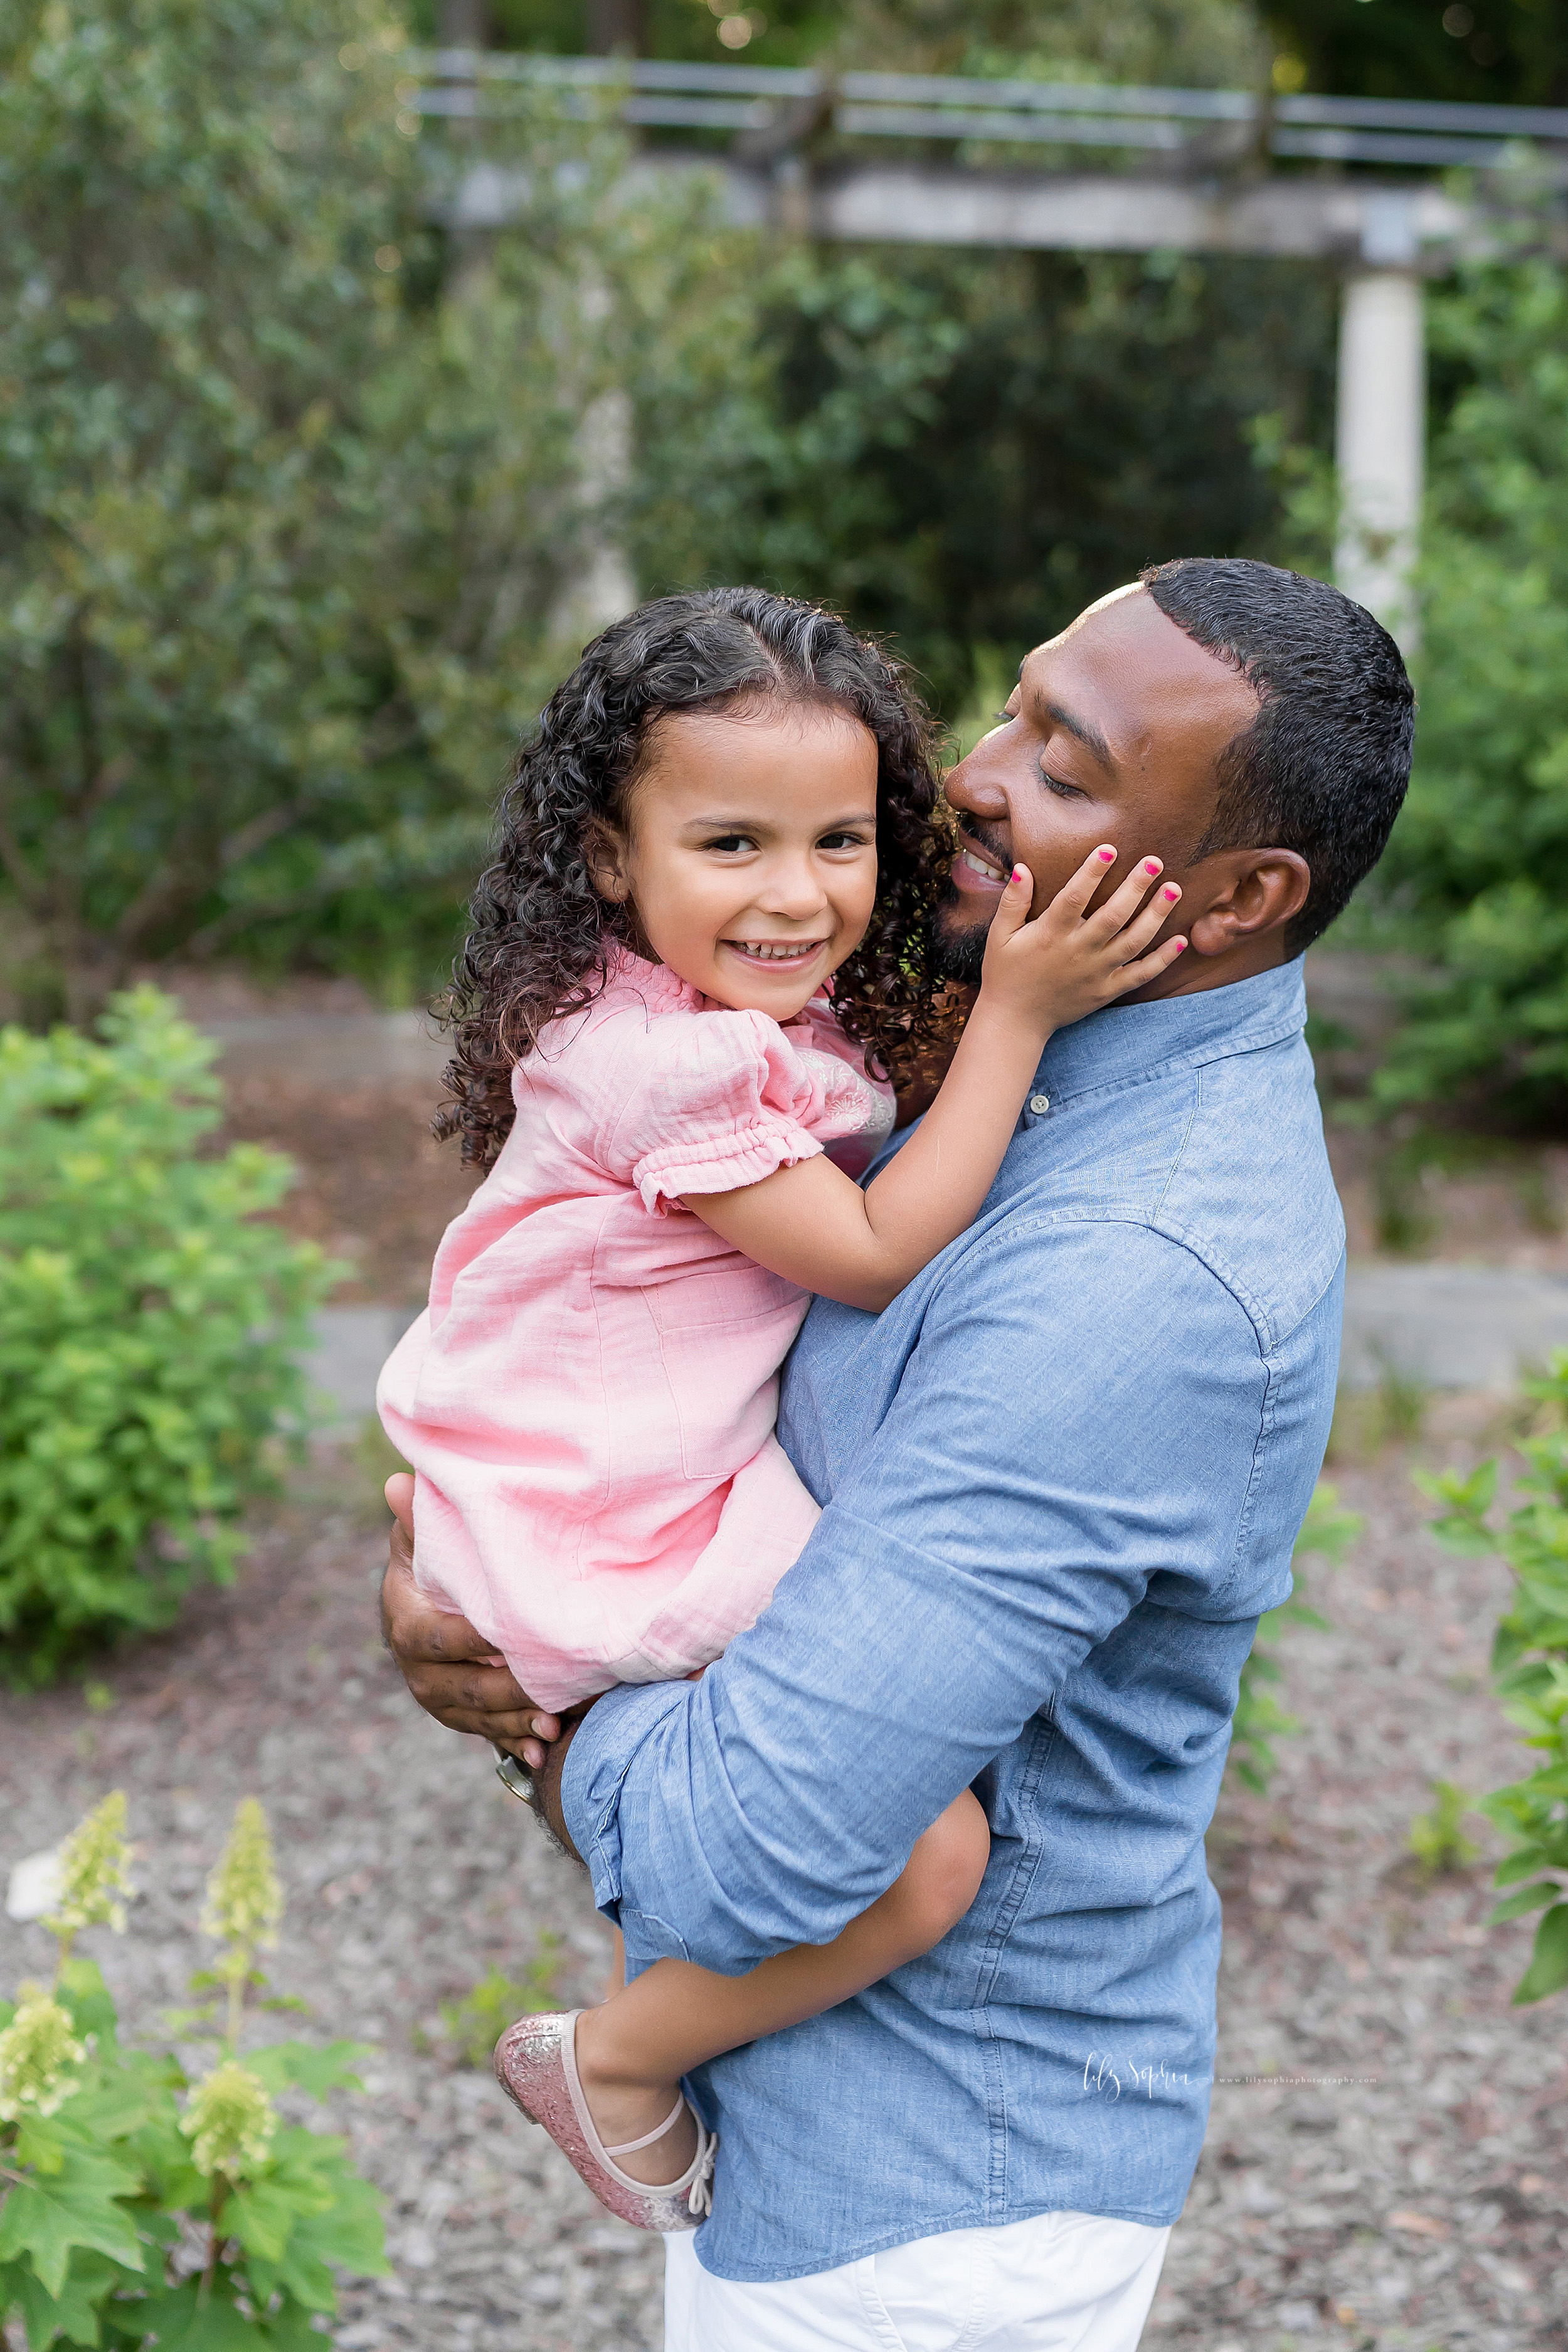  Photo of a happy African-American father holding his young daughter in an Atlanta garden. The father is showcasing his profile as he holds his daughter in his arms. The young daughter has her hands on her father’s cheeks and you can see her delicate